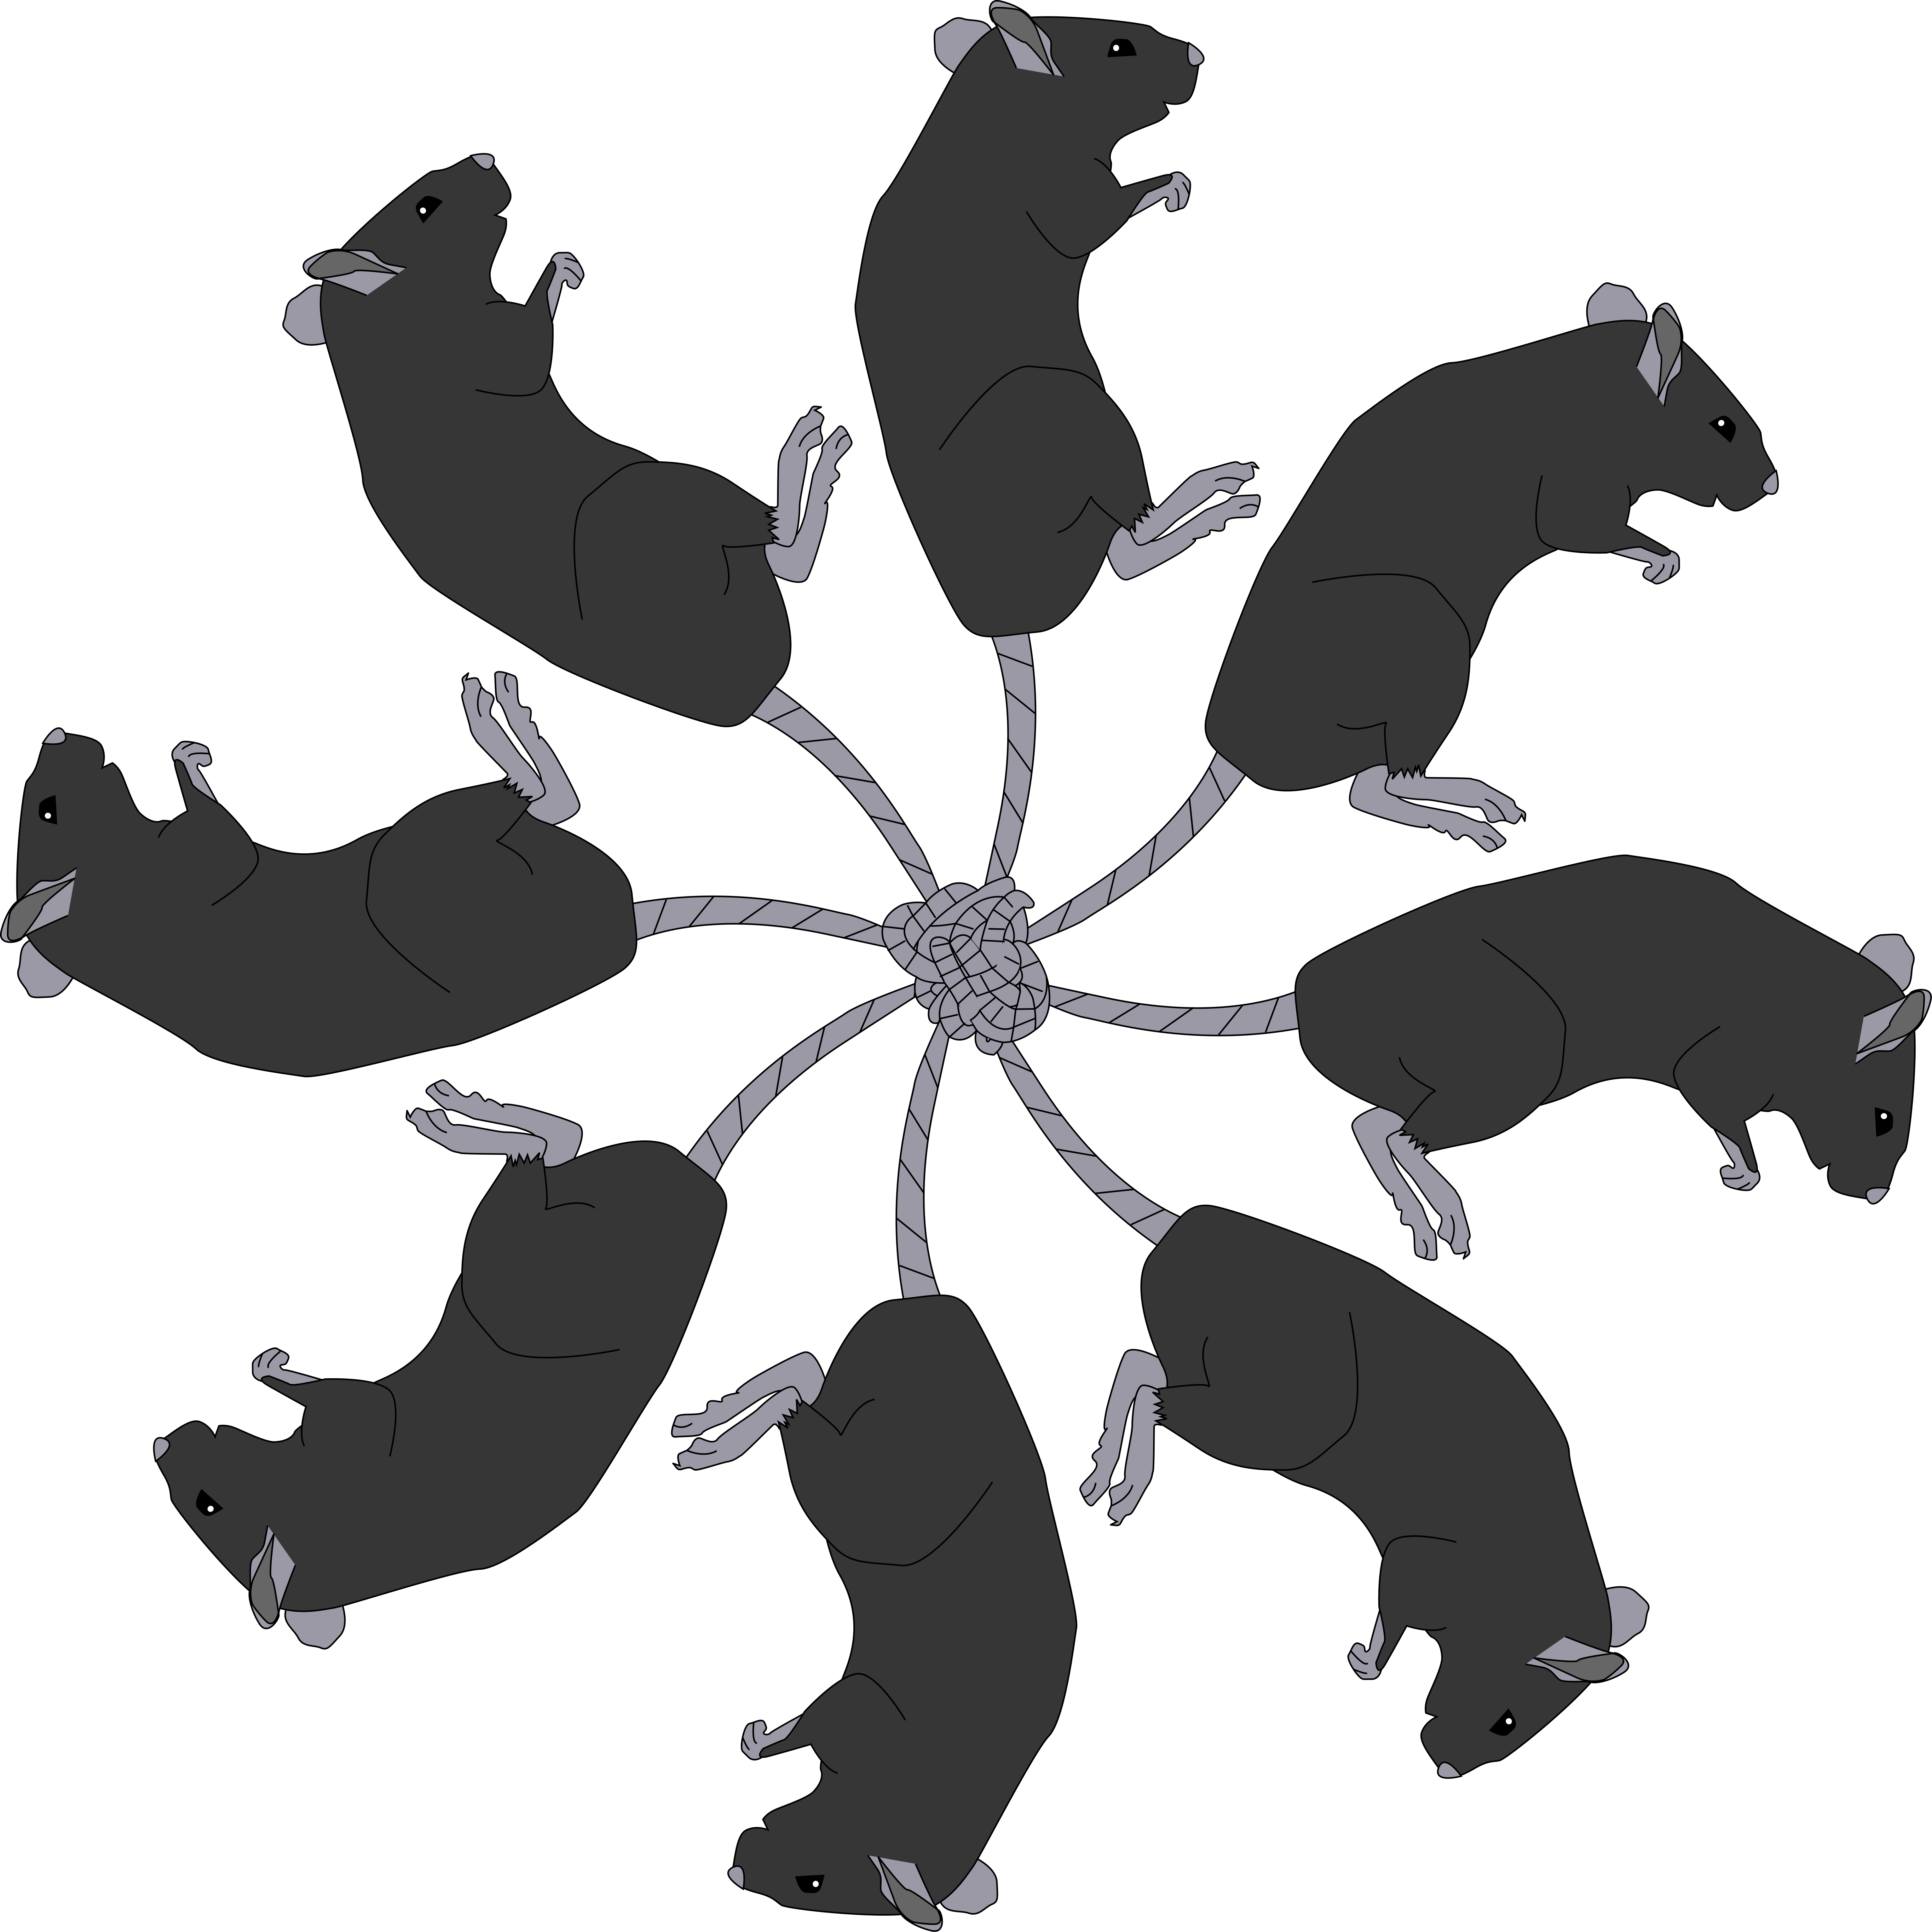 Freehand Drawn Cartoon Rat King Royalty Free SVG, Cliparts, Vectors, and  Stock Illustration. Image 54064155.